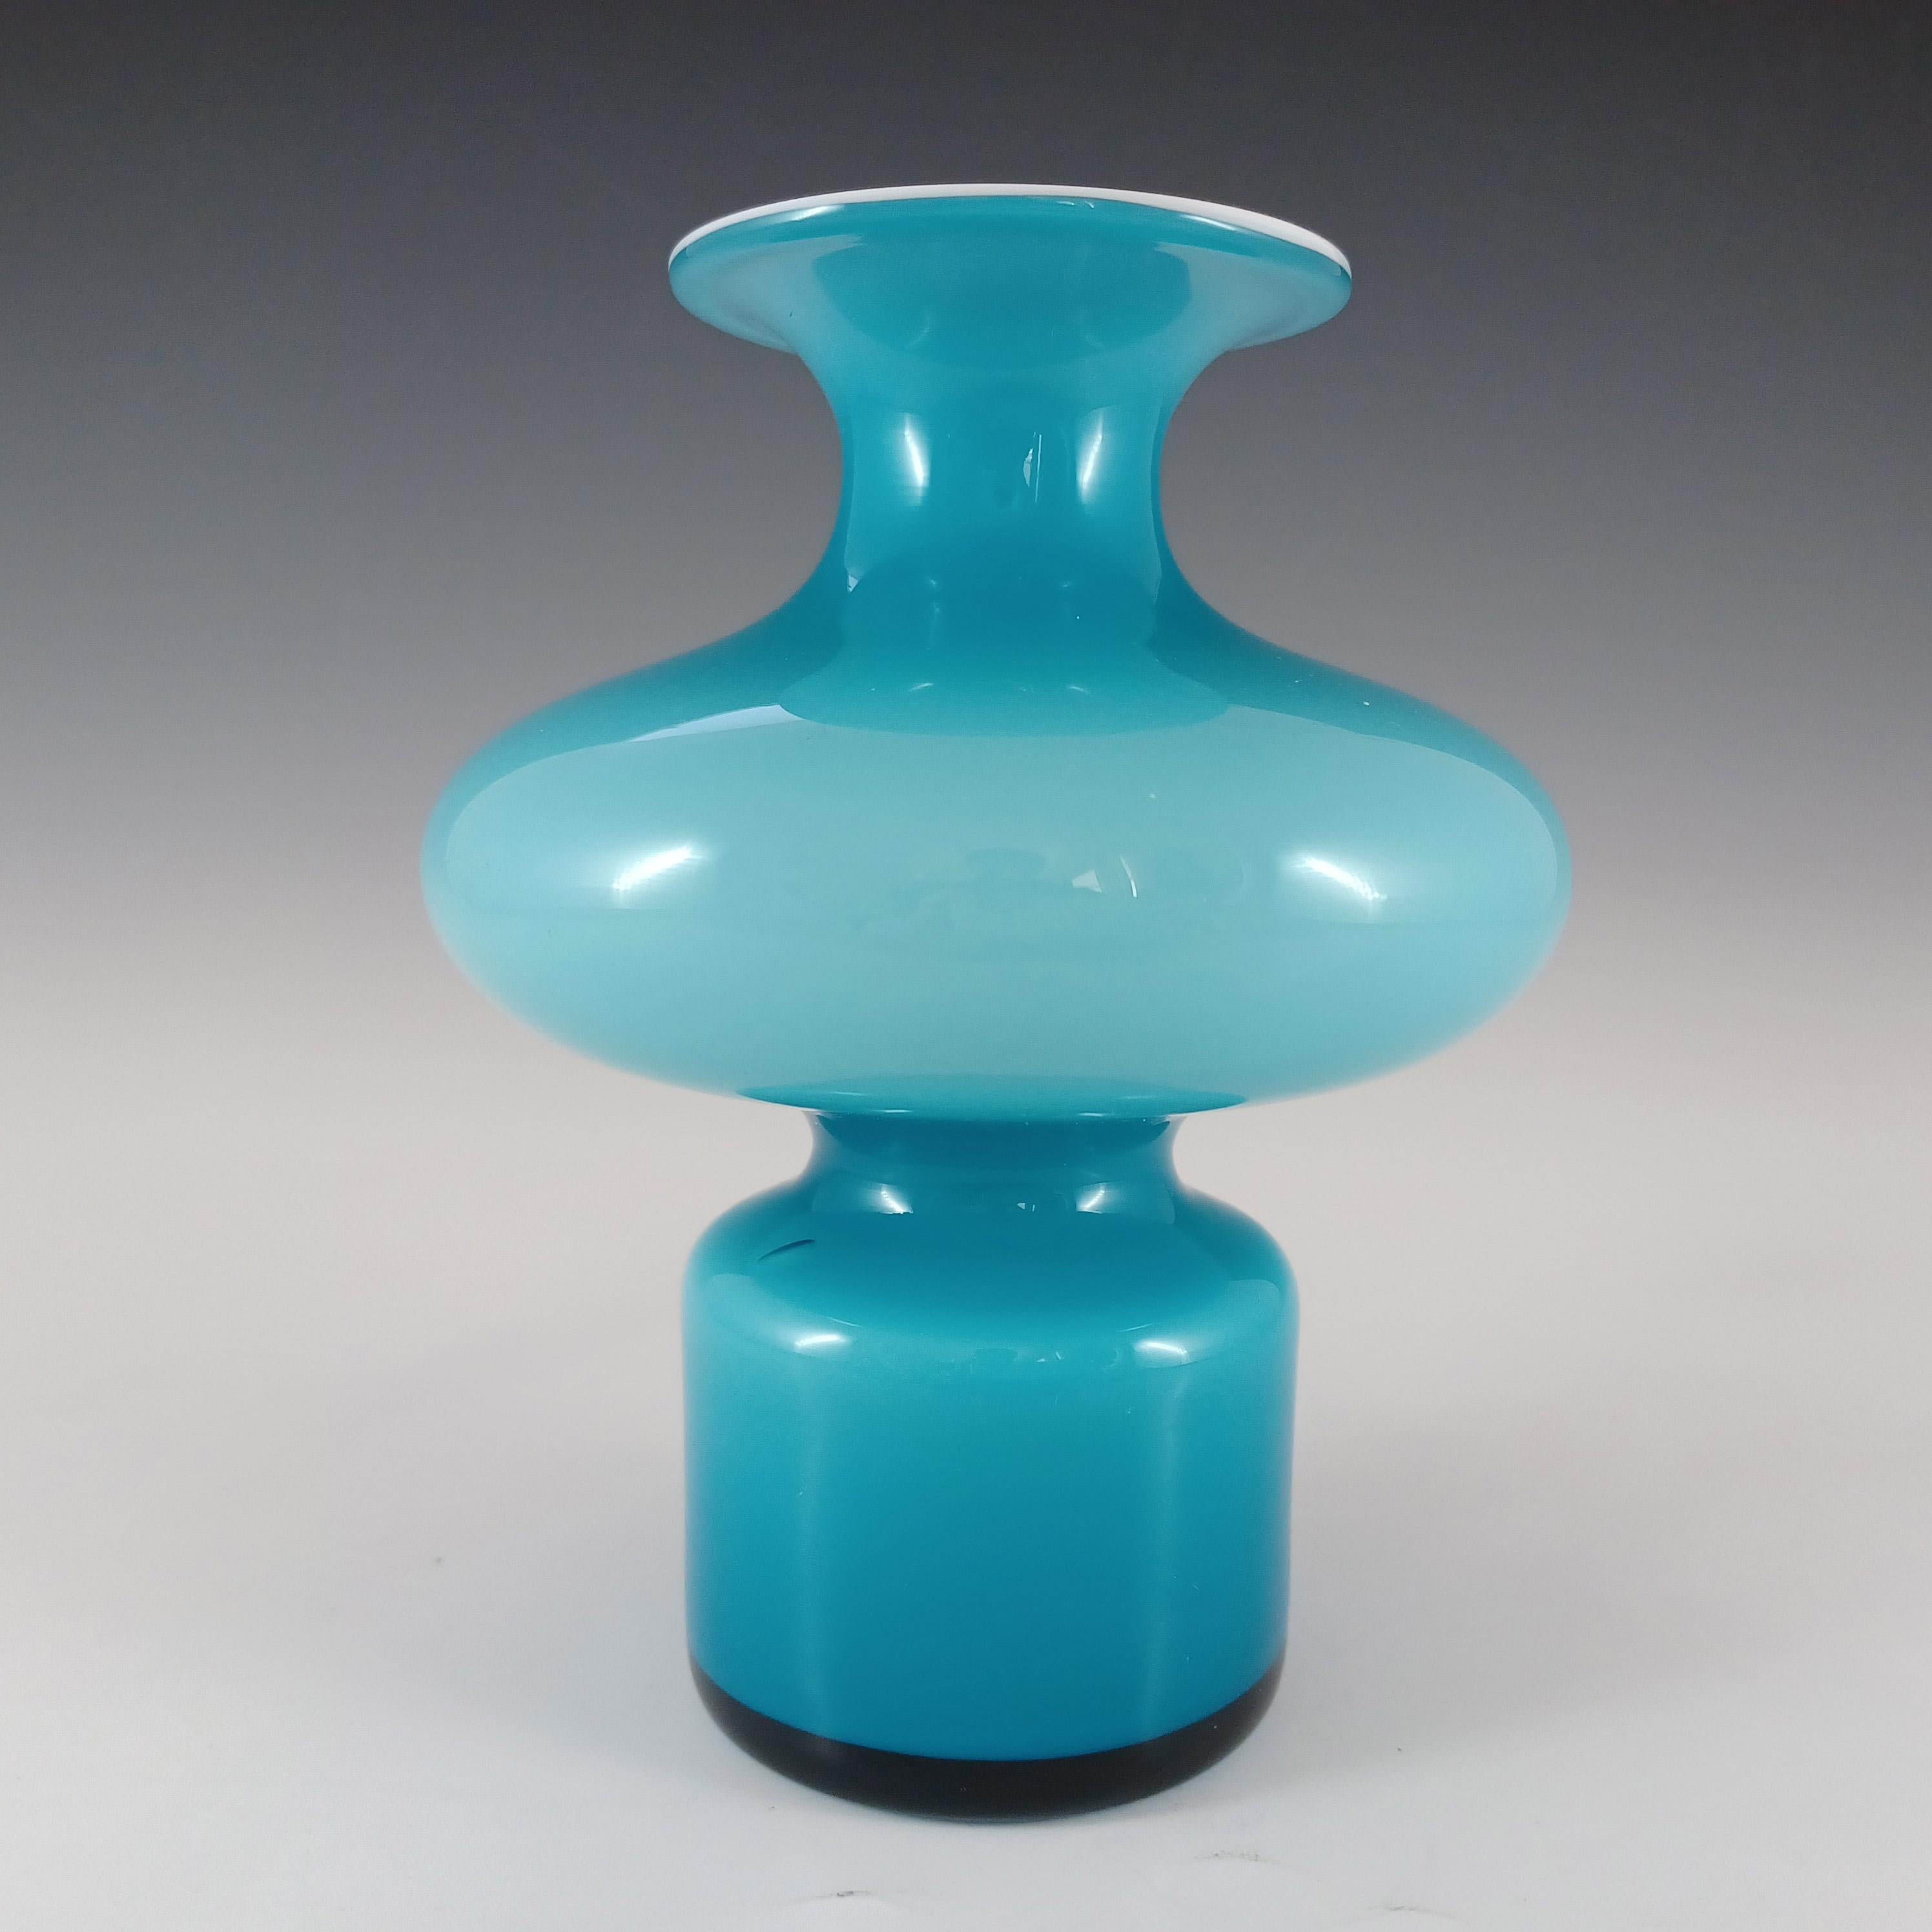 A stunning Scandinavian blue cased glass hooped vase with white interior casing. Made by Holmegaard of Denmark, designed by Per Lutken, part of his 